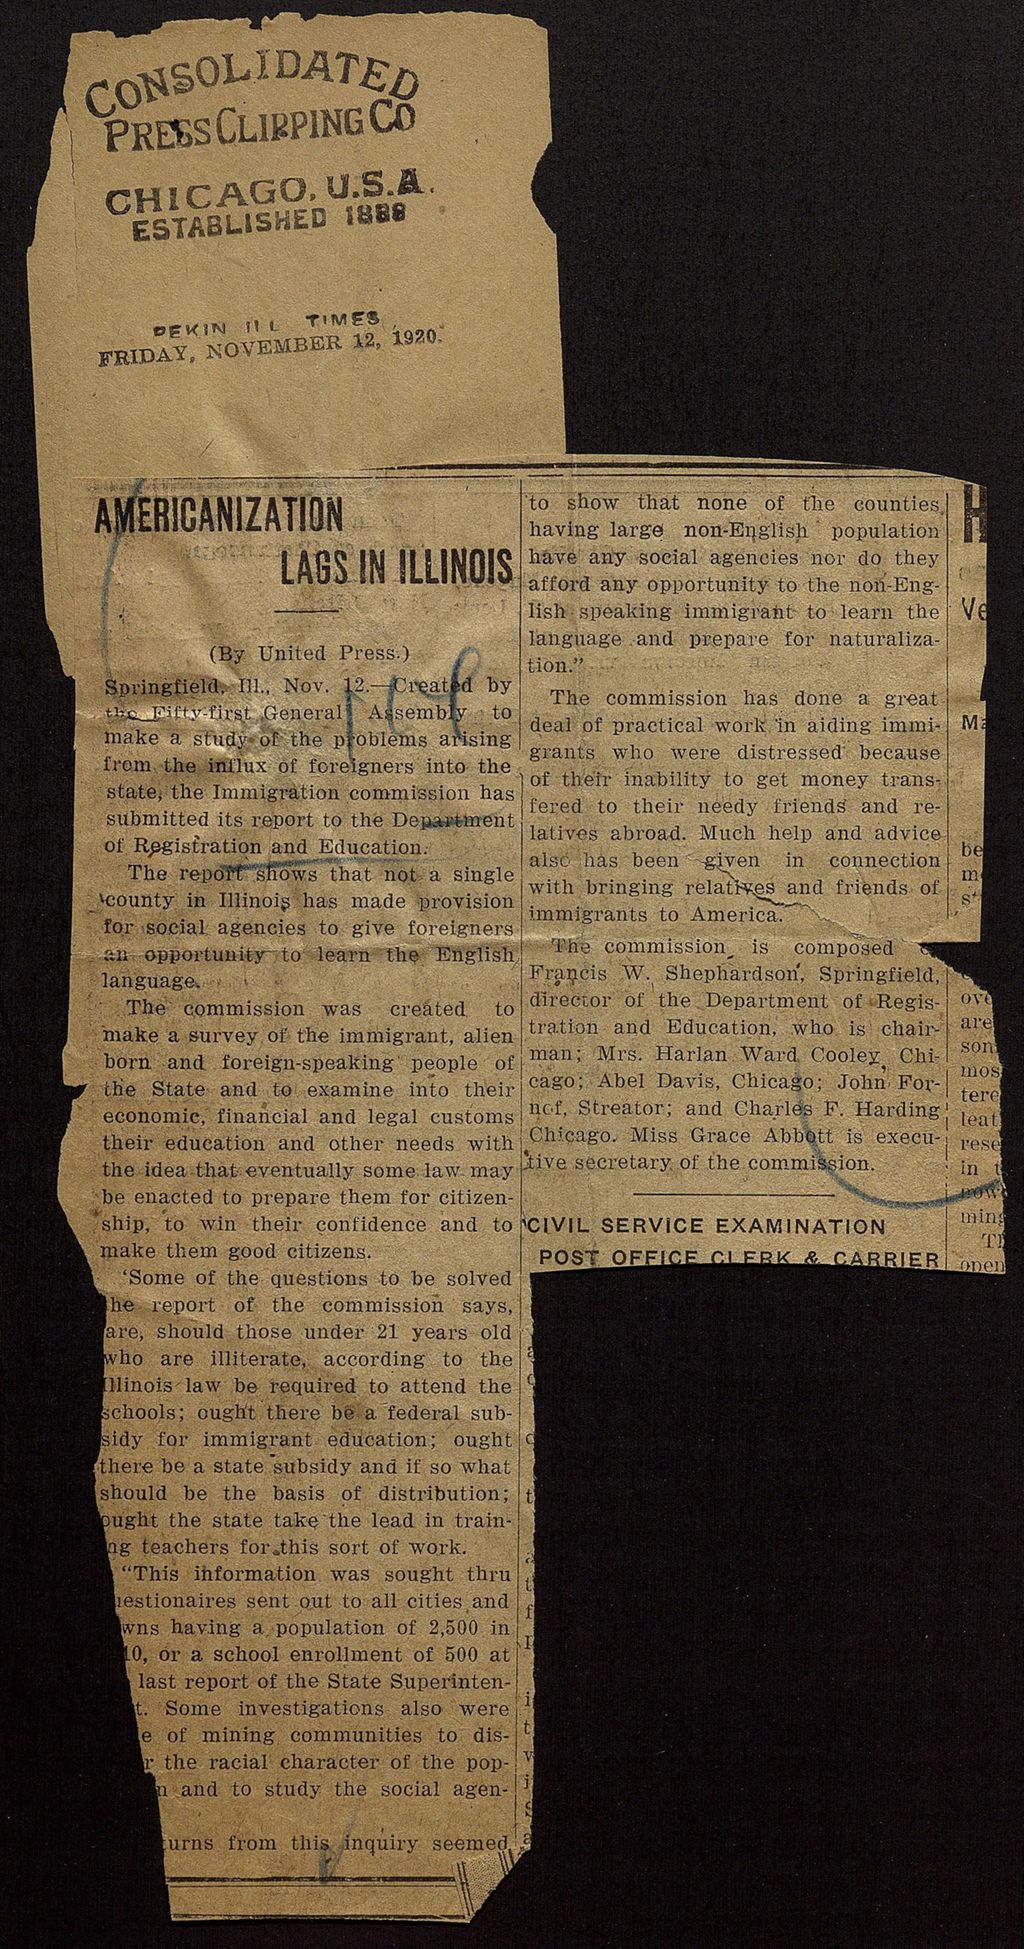 Miniature of Press Clippings on Immigration, 1920-1957 (Folder 98)